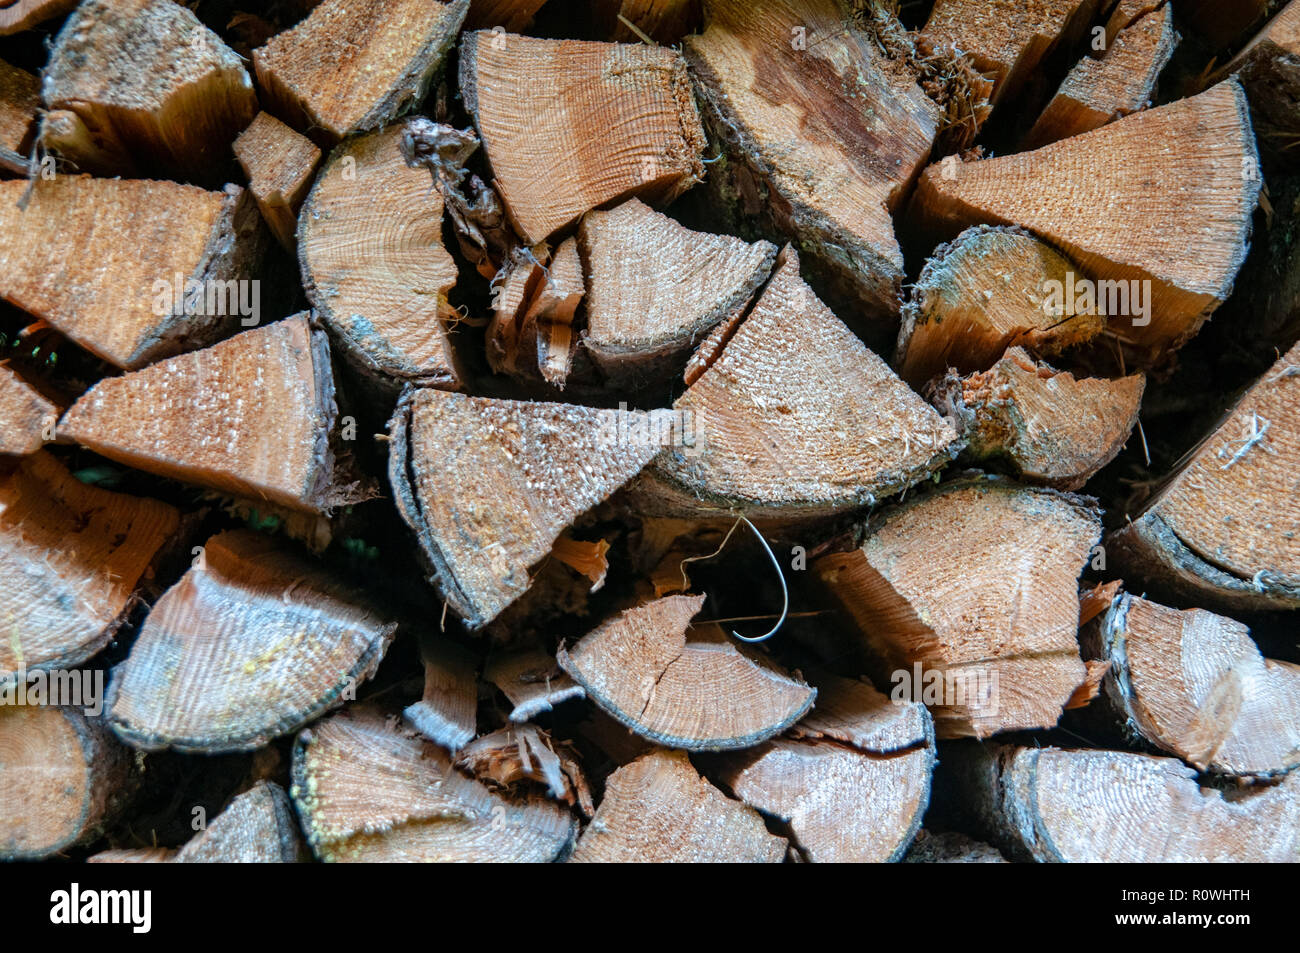 Stack of fire wood in a shed front view Stock Photo